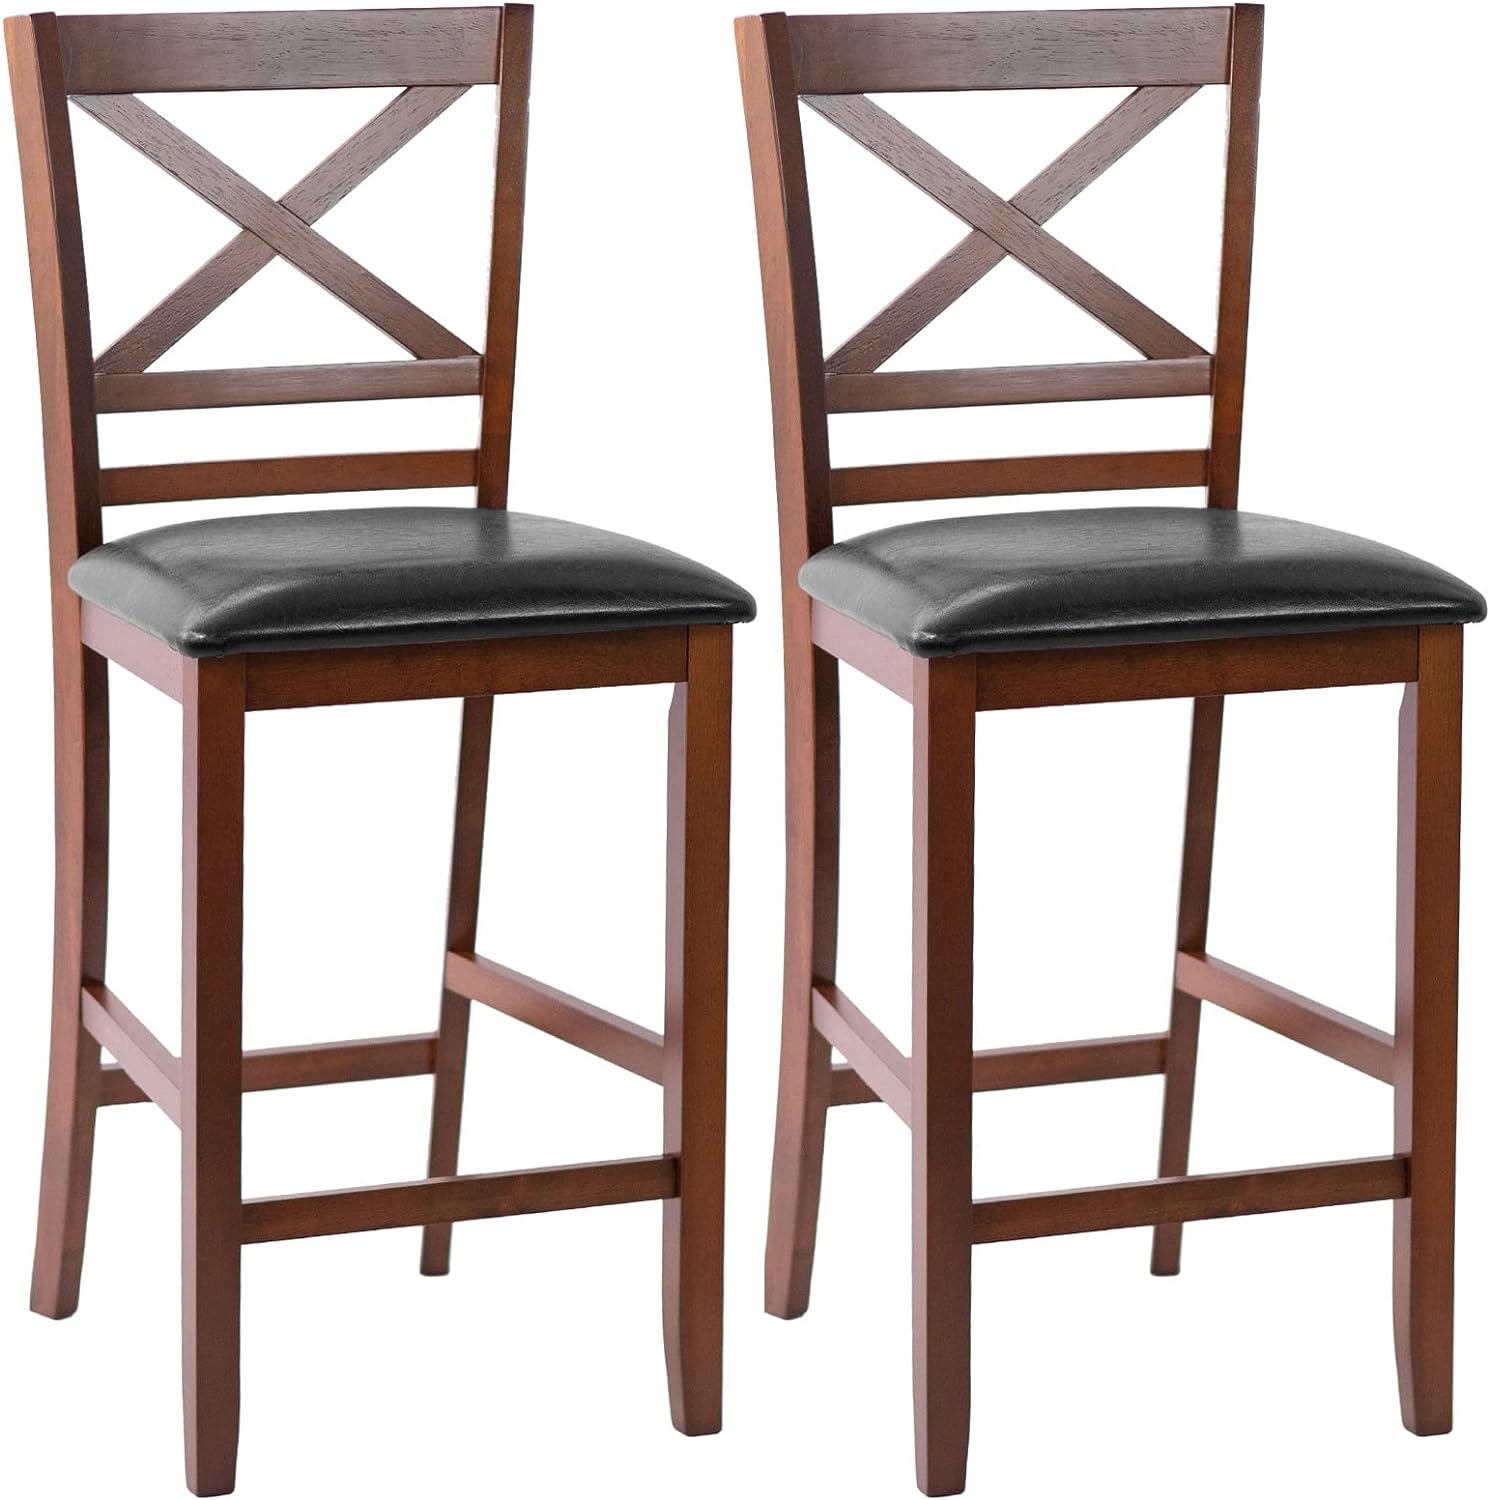 COSTWAY Bar stools Set of 2, Modern 25 Counter Height Dining Pub Stools with X-Shaped Backrest, Soft Cushion & Durable PU Seat, Simplistic Armless Kitchen Chairs for Home, Cafe Store, Restaurant (2)